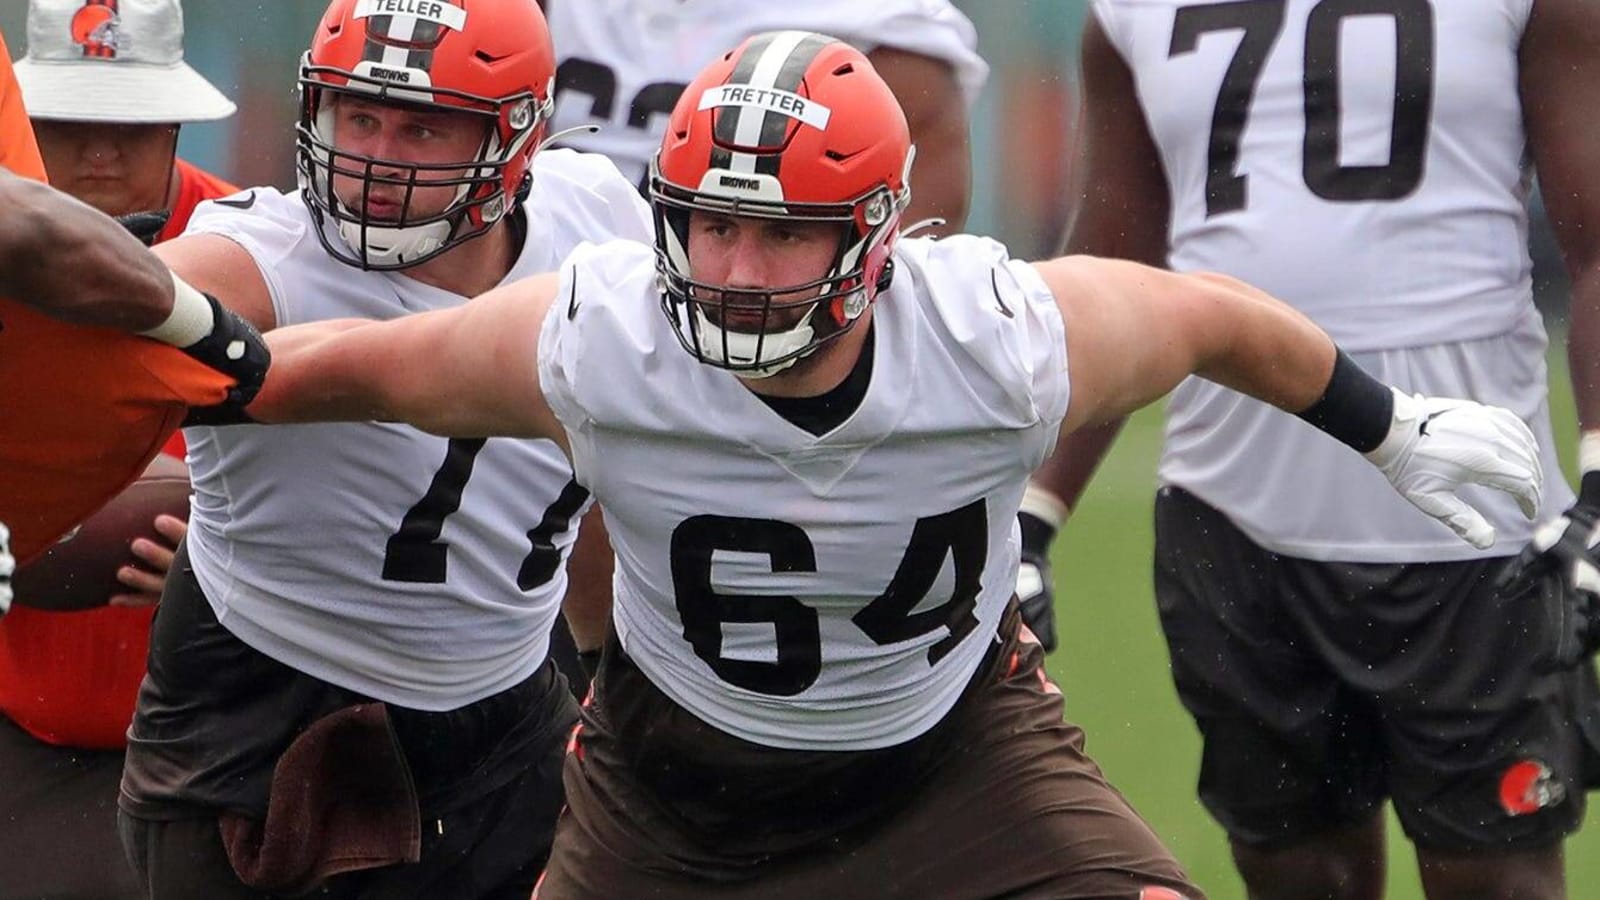 The Browns are releasing center JC Tretter